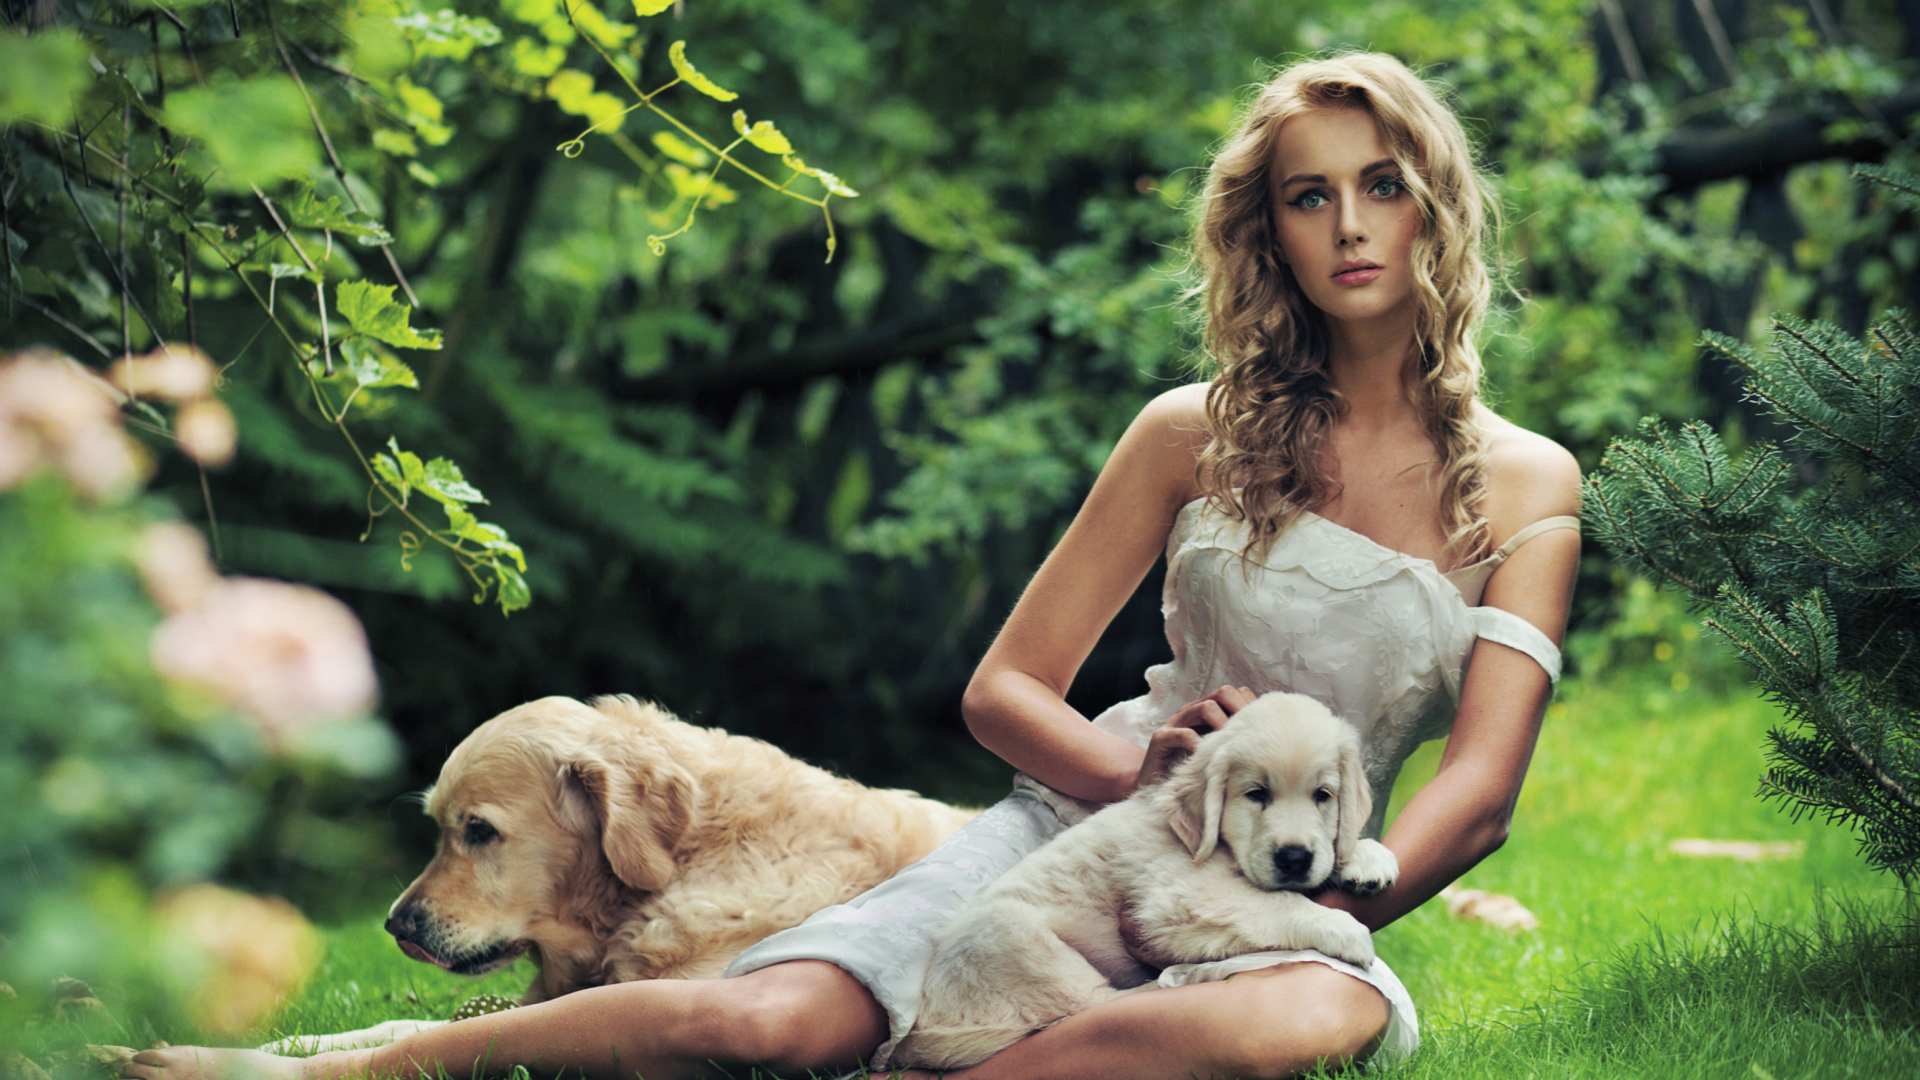 Das Model And Dogs Wallpaper 1920x1080